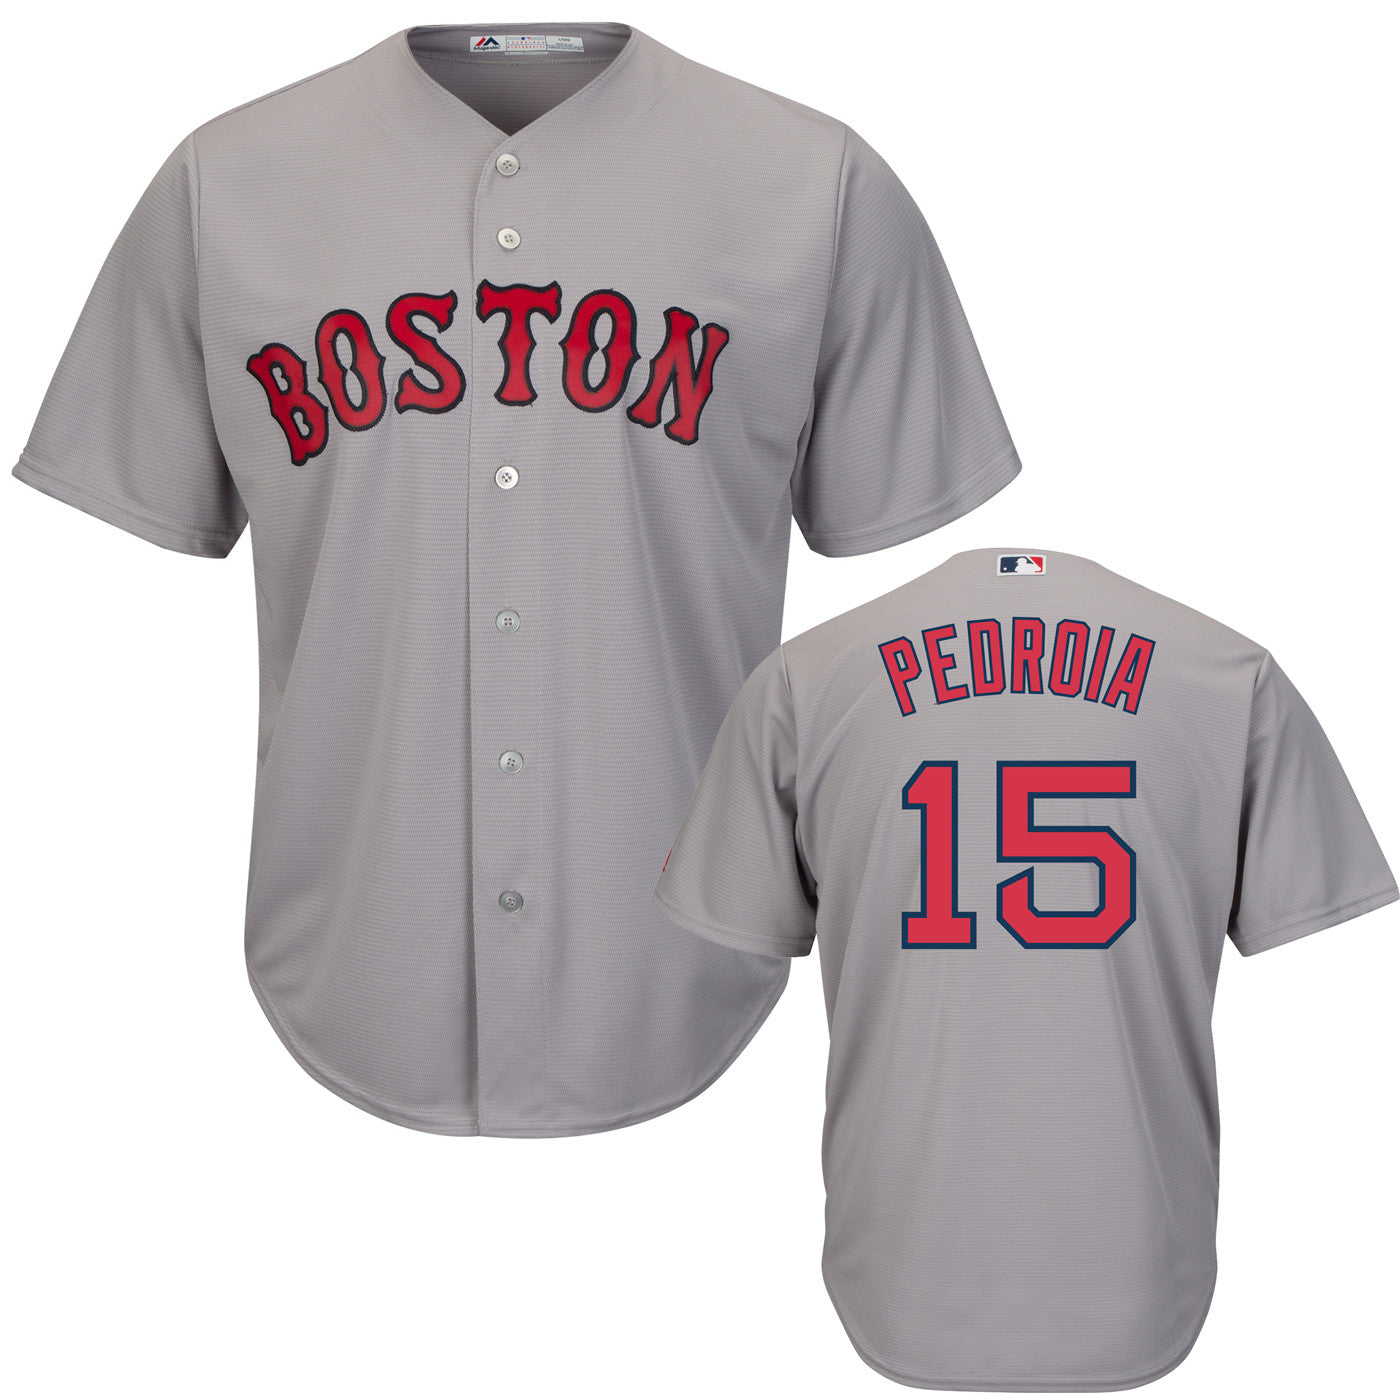 red soxs jersey